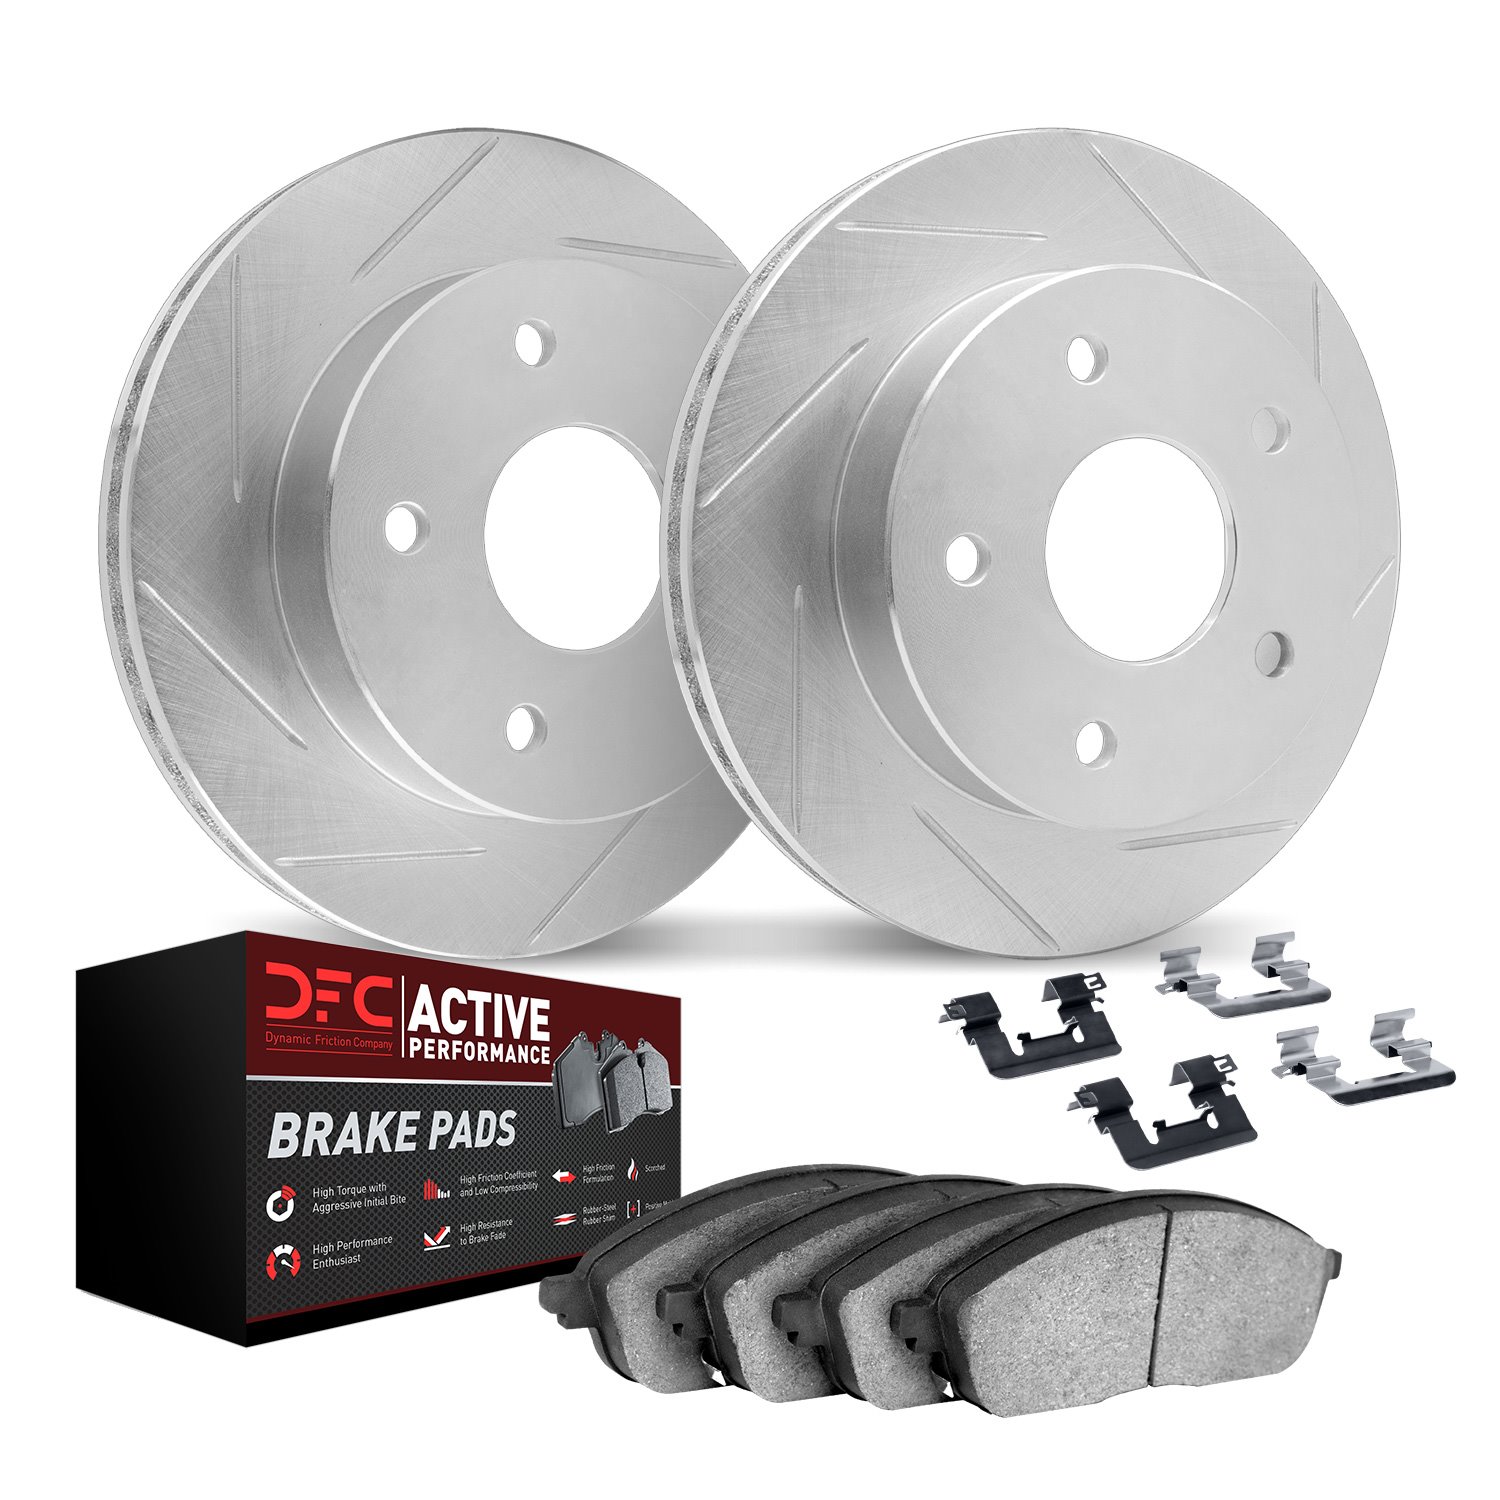 2712-54060 Geoperformance Slotted Brake Rotors with Active Performance Pads Kits & Hardware, 2004-2019 Multiple Makes/Models, Po